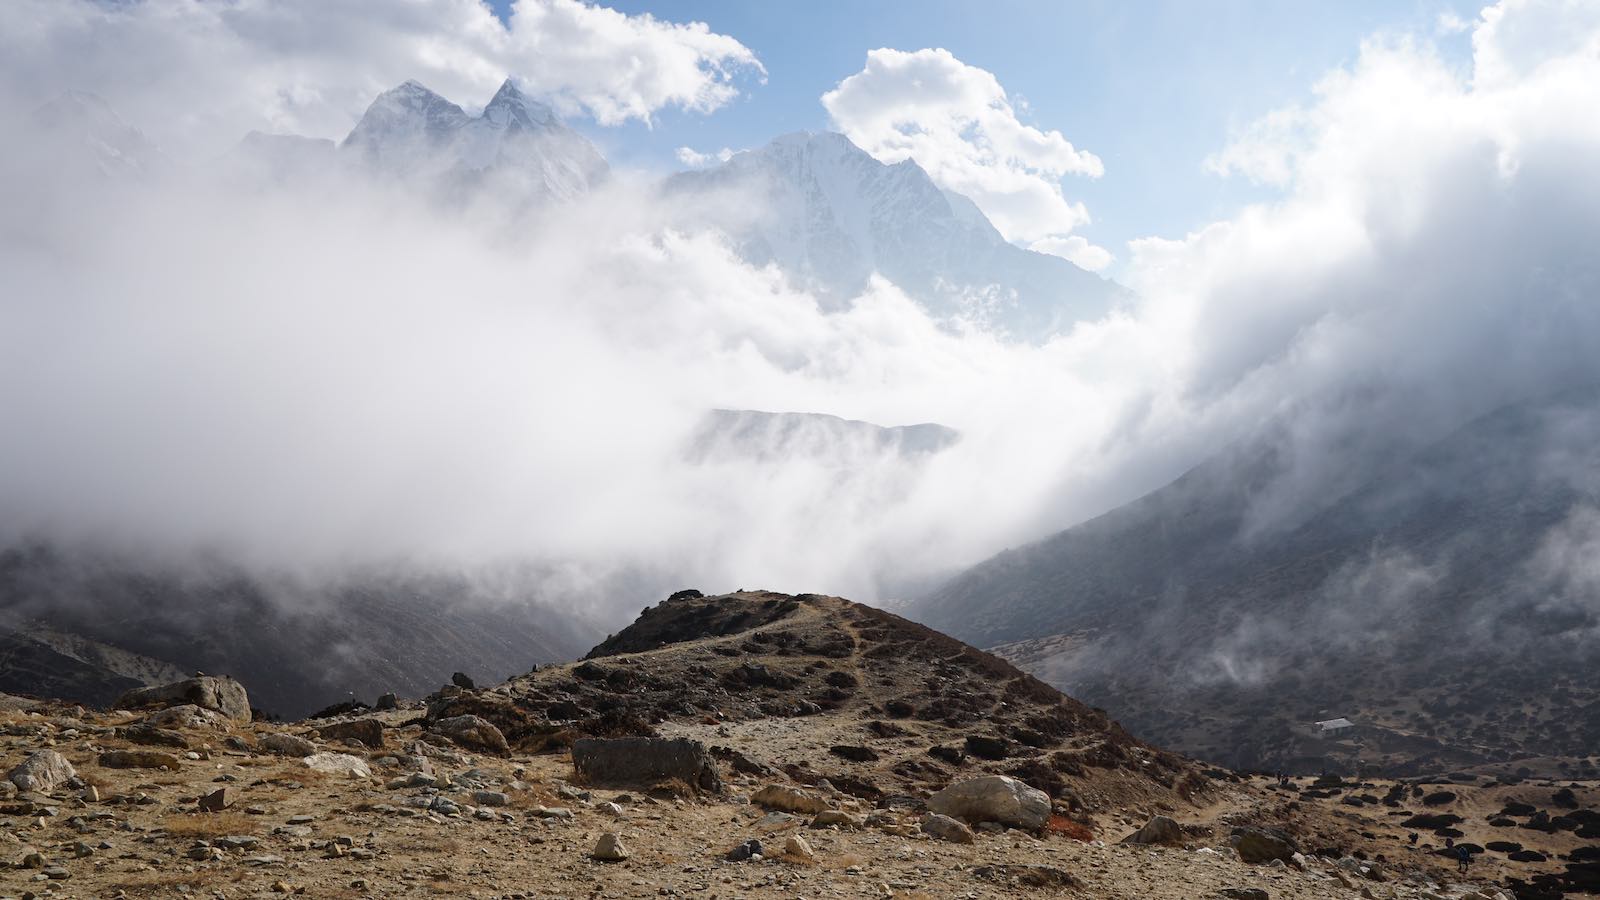 Second half of the trek was almost mystical with the 'low' hanging clouds shrouding the adjacent mountains